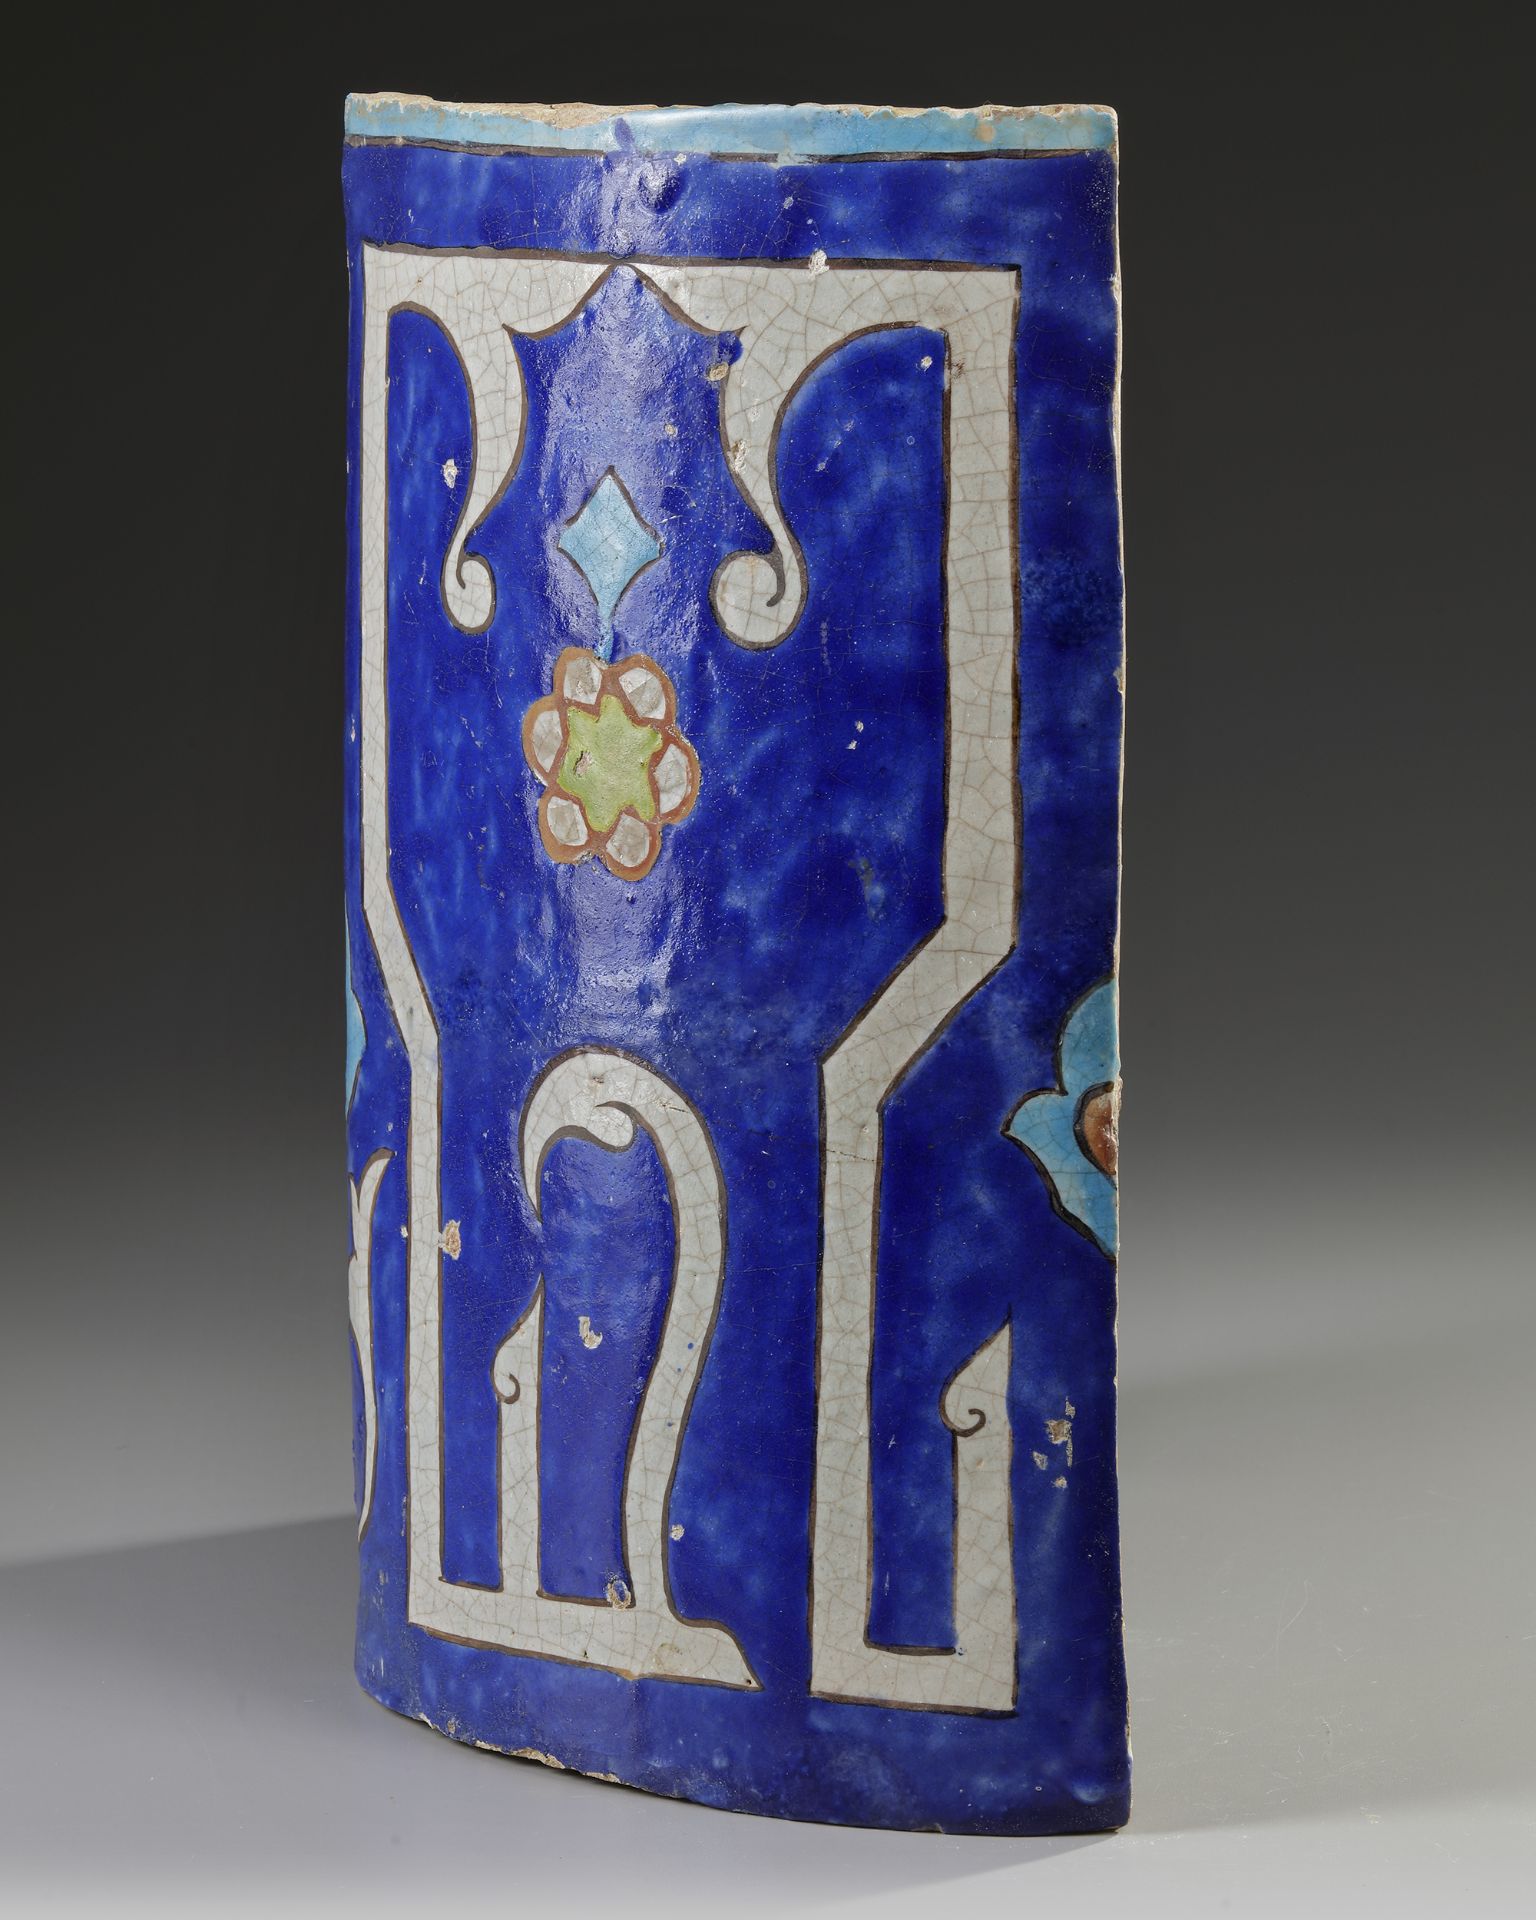 A TIMURID CALLIGRAPHIC POTTERY TILE, CENTRAL ASIA OR EASTERN PERSIA, 14TH-15TH CENTURY - Image 8 of 10